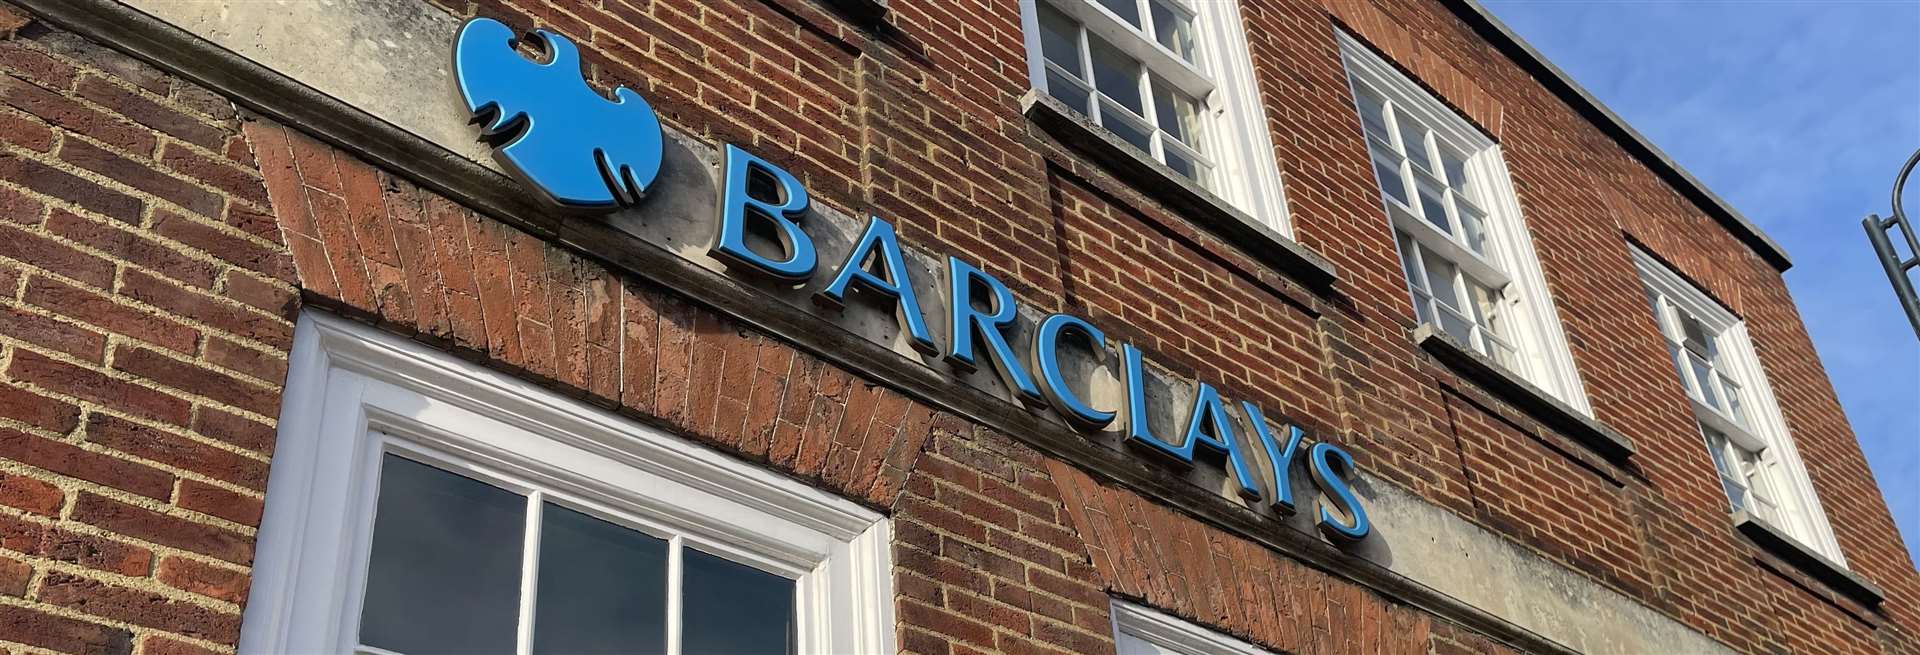 Barclays paid out more than £10 million to the victims